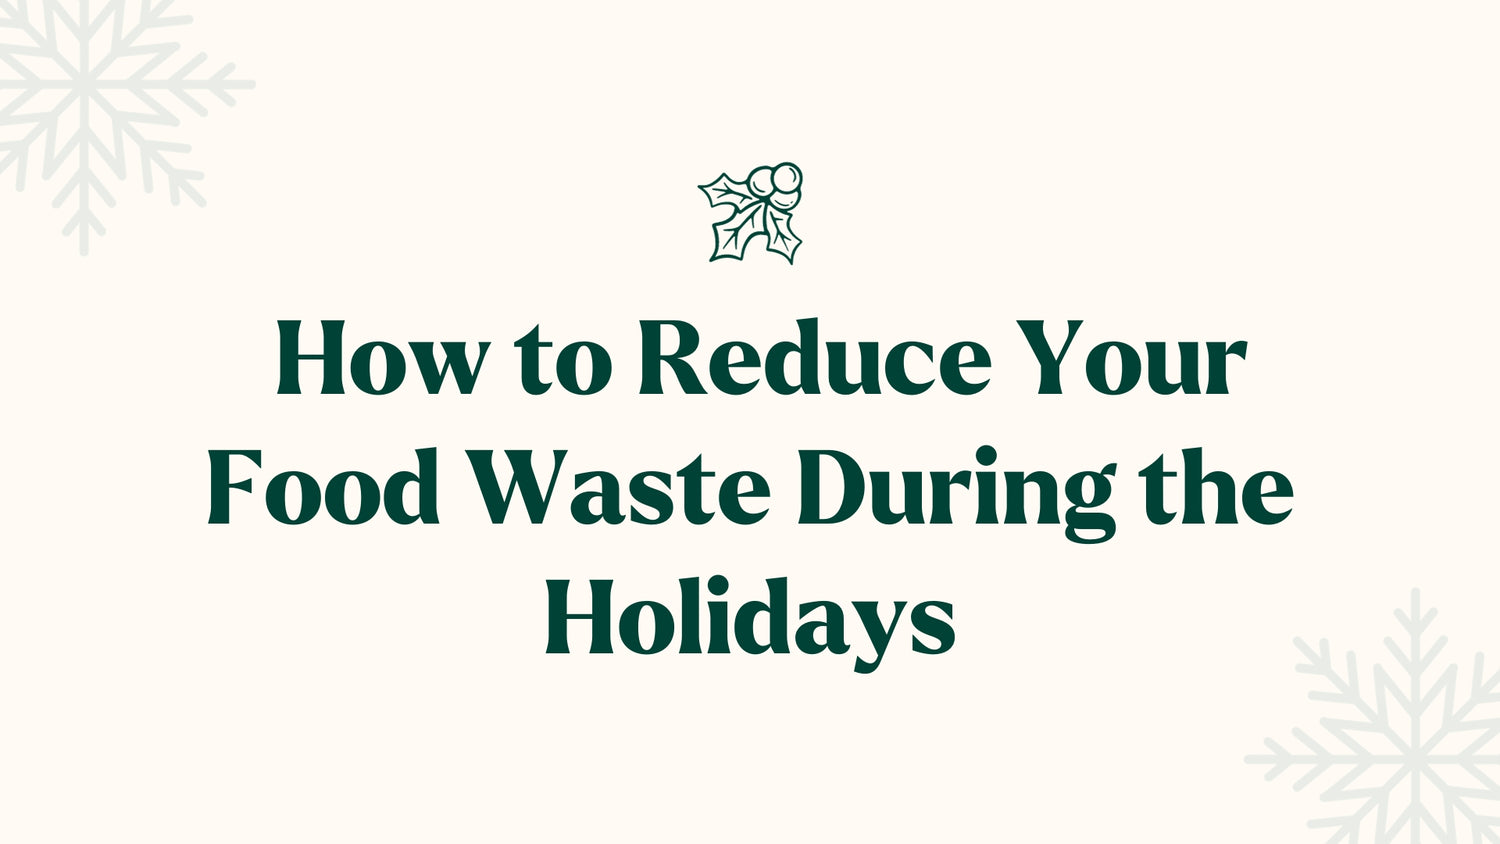 How to Reduce Your Food Waste During the Holidays